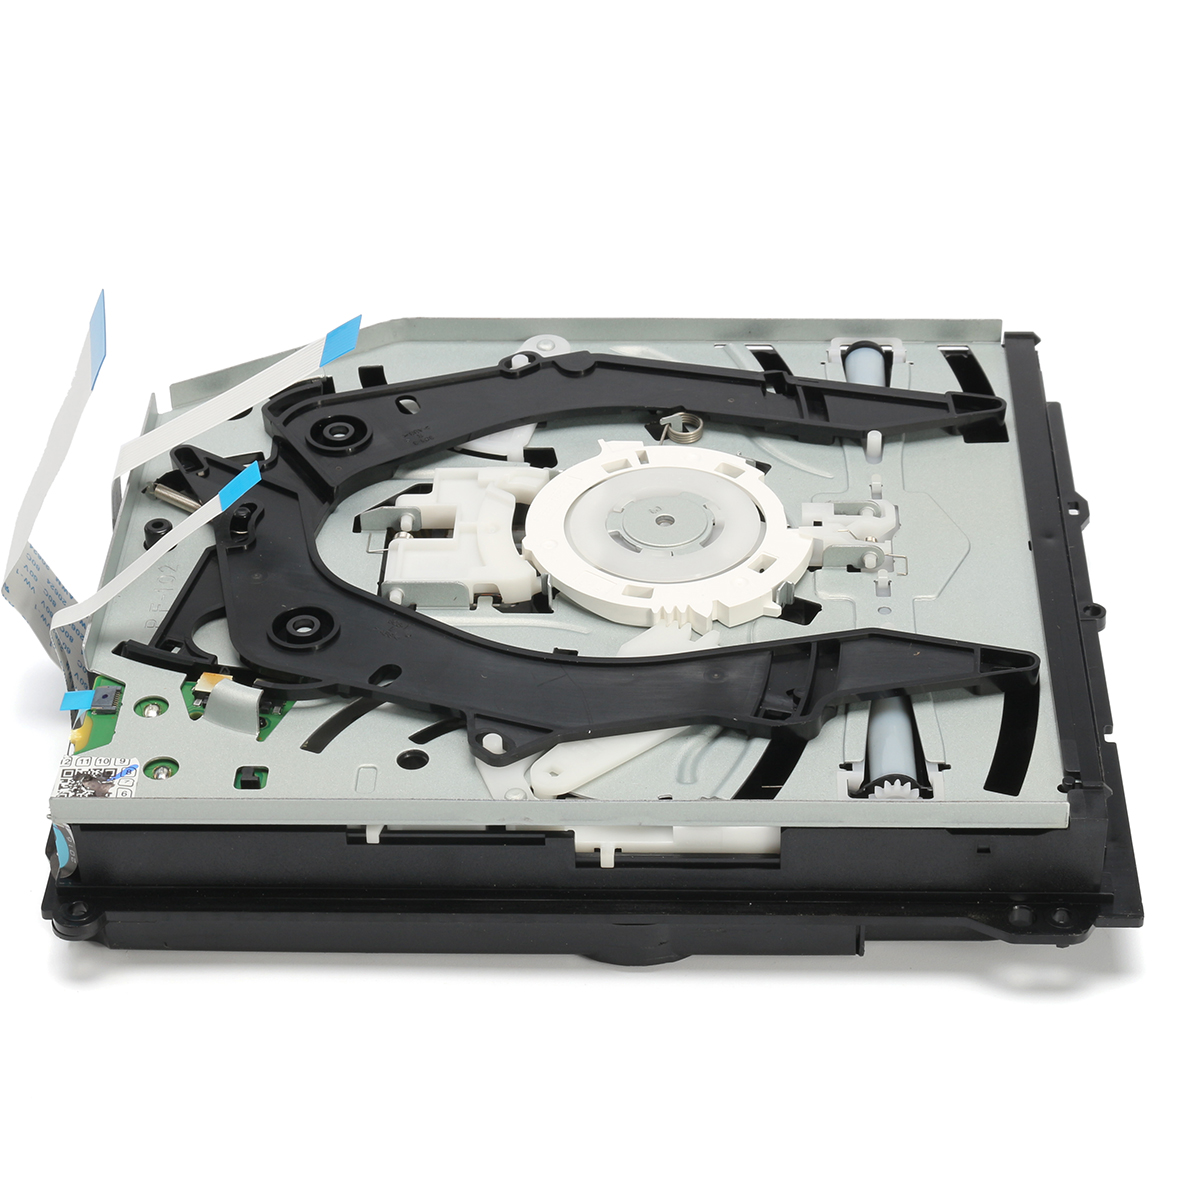 Blu-ray-Disk-CD-Drive-Replacement-Part-for-Sony-PS4-CUH-1215A-CUH-1215B-500GB-1TB-1332338-2